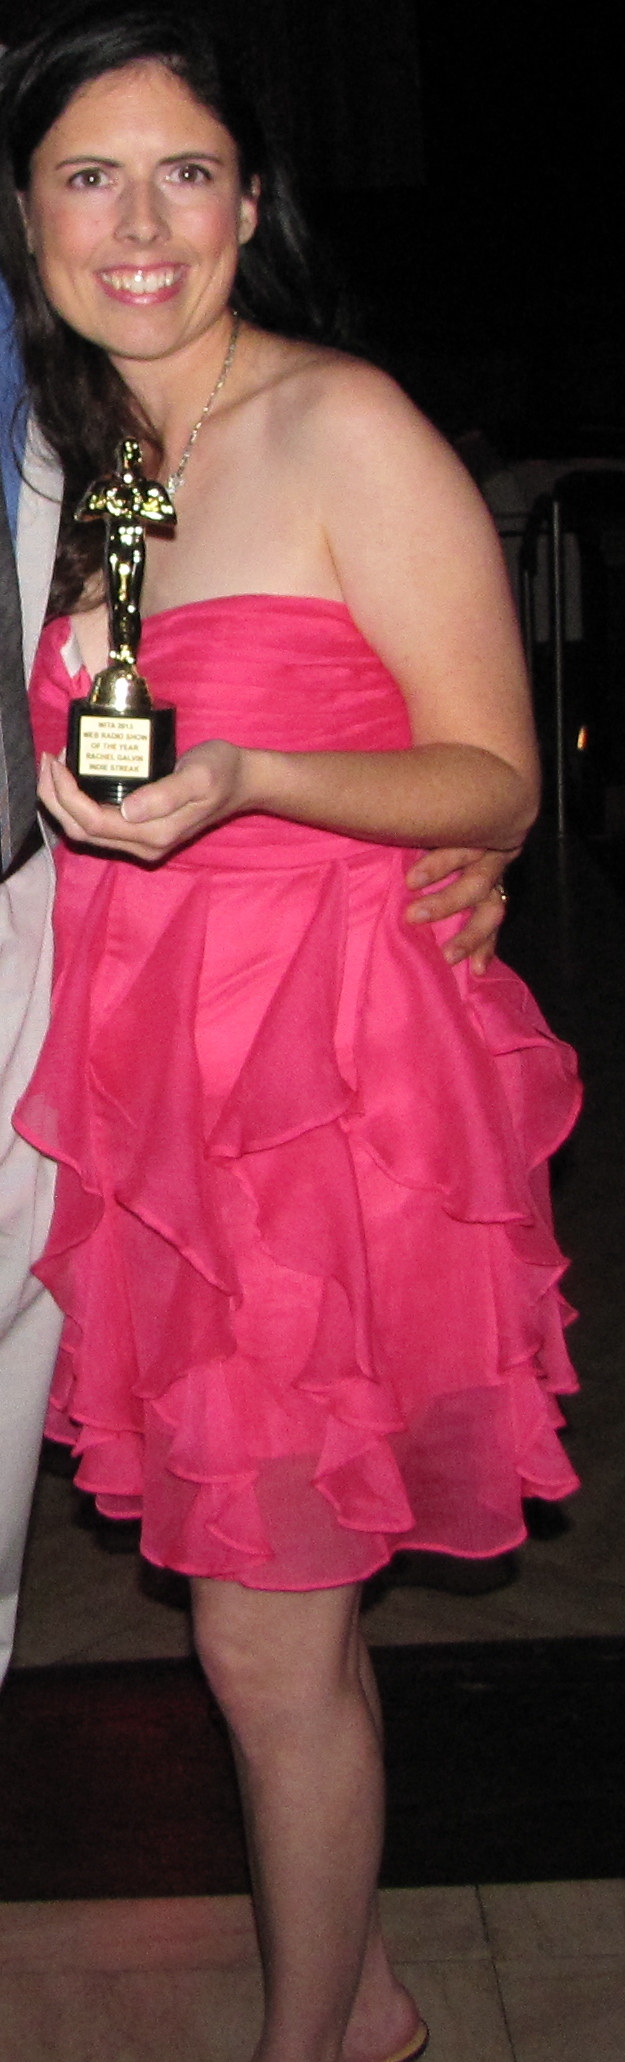 Rachel Galvin with award for Web Radio Show of the Year at Women in the Arts Awards, Sept. 2012